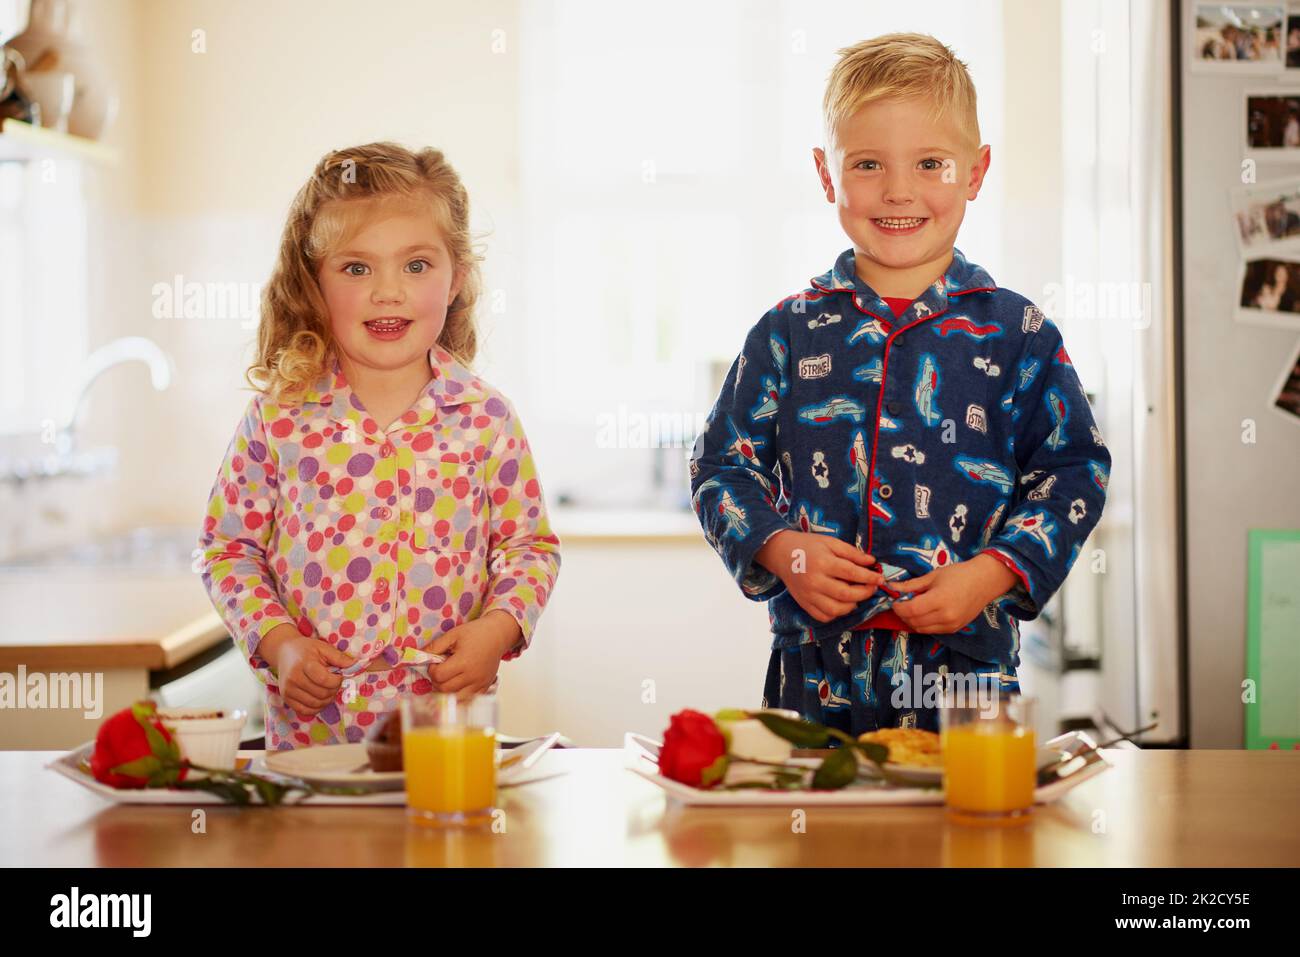 https://c8.alamy.com/comp/2K2CY5E/we-made-this-with-lots-of-love-portrait-of-two-adorable-little-siblings-preparing-breakfast-on-serving-trays-at-home-2K2CY5E.jpg